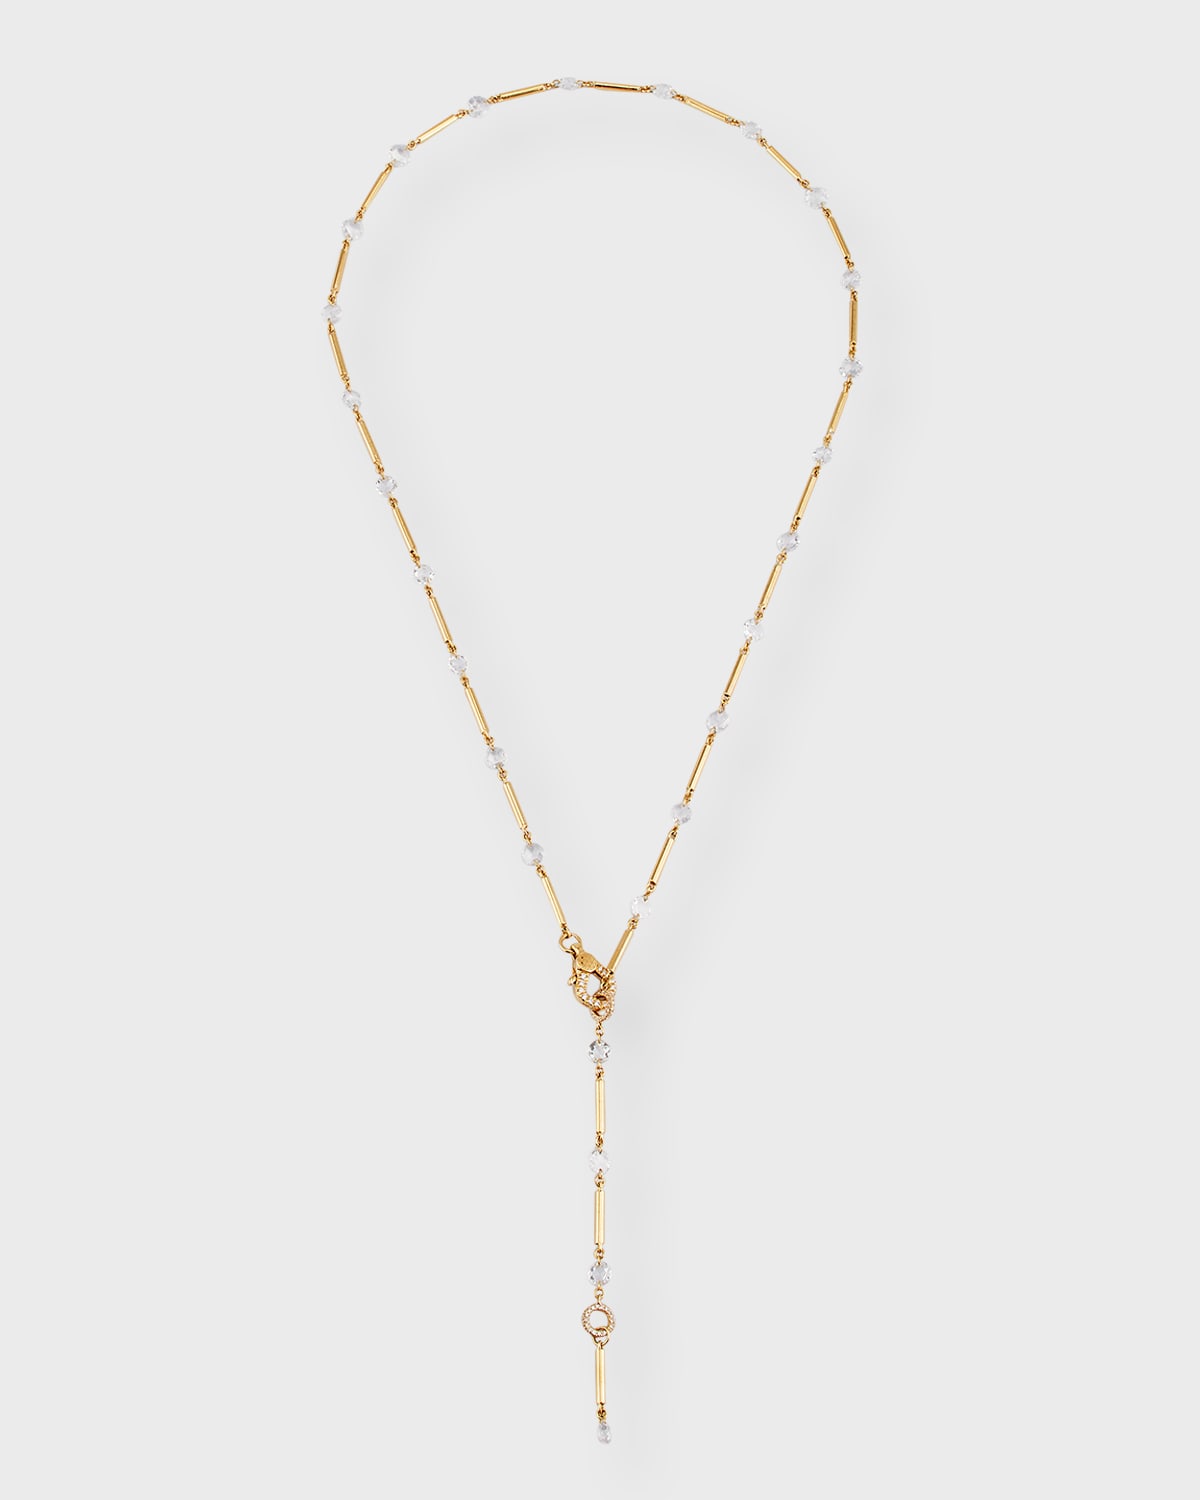 64 Facets 18k Yellow Gold Ethereal Diamond And Gold Bar Necklace